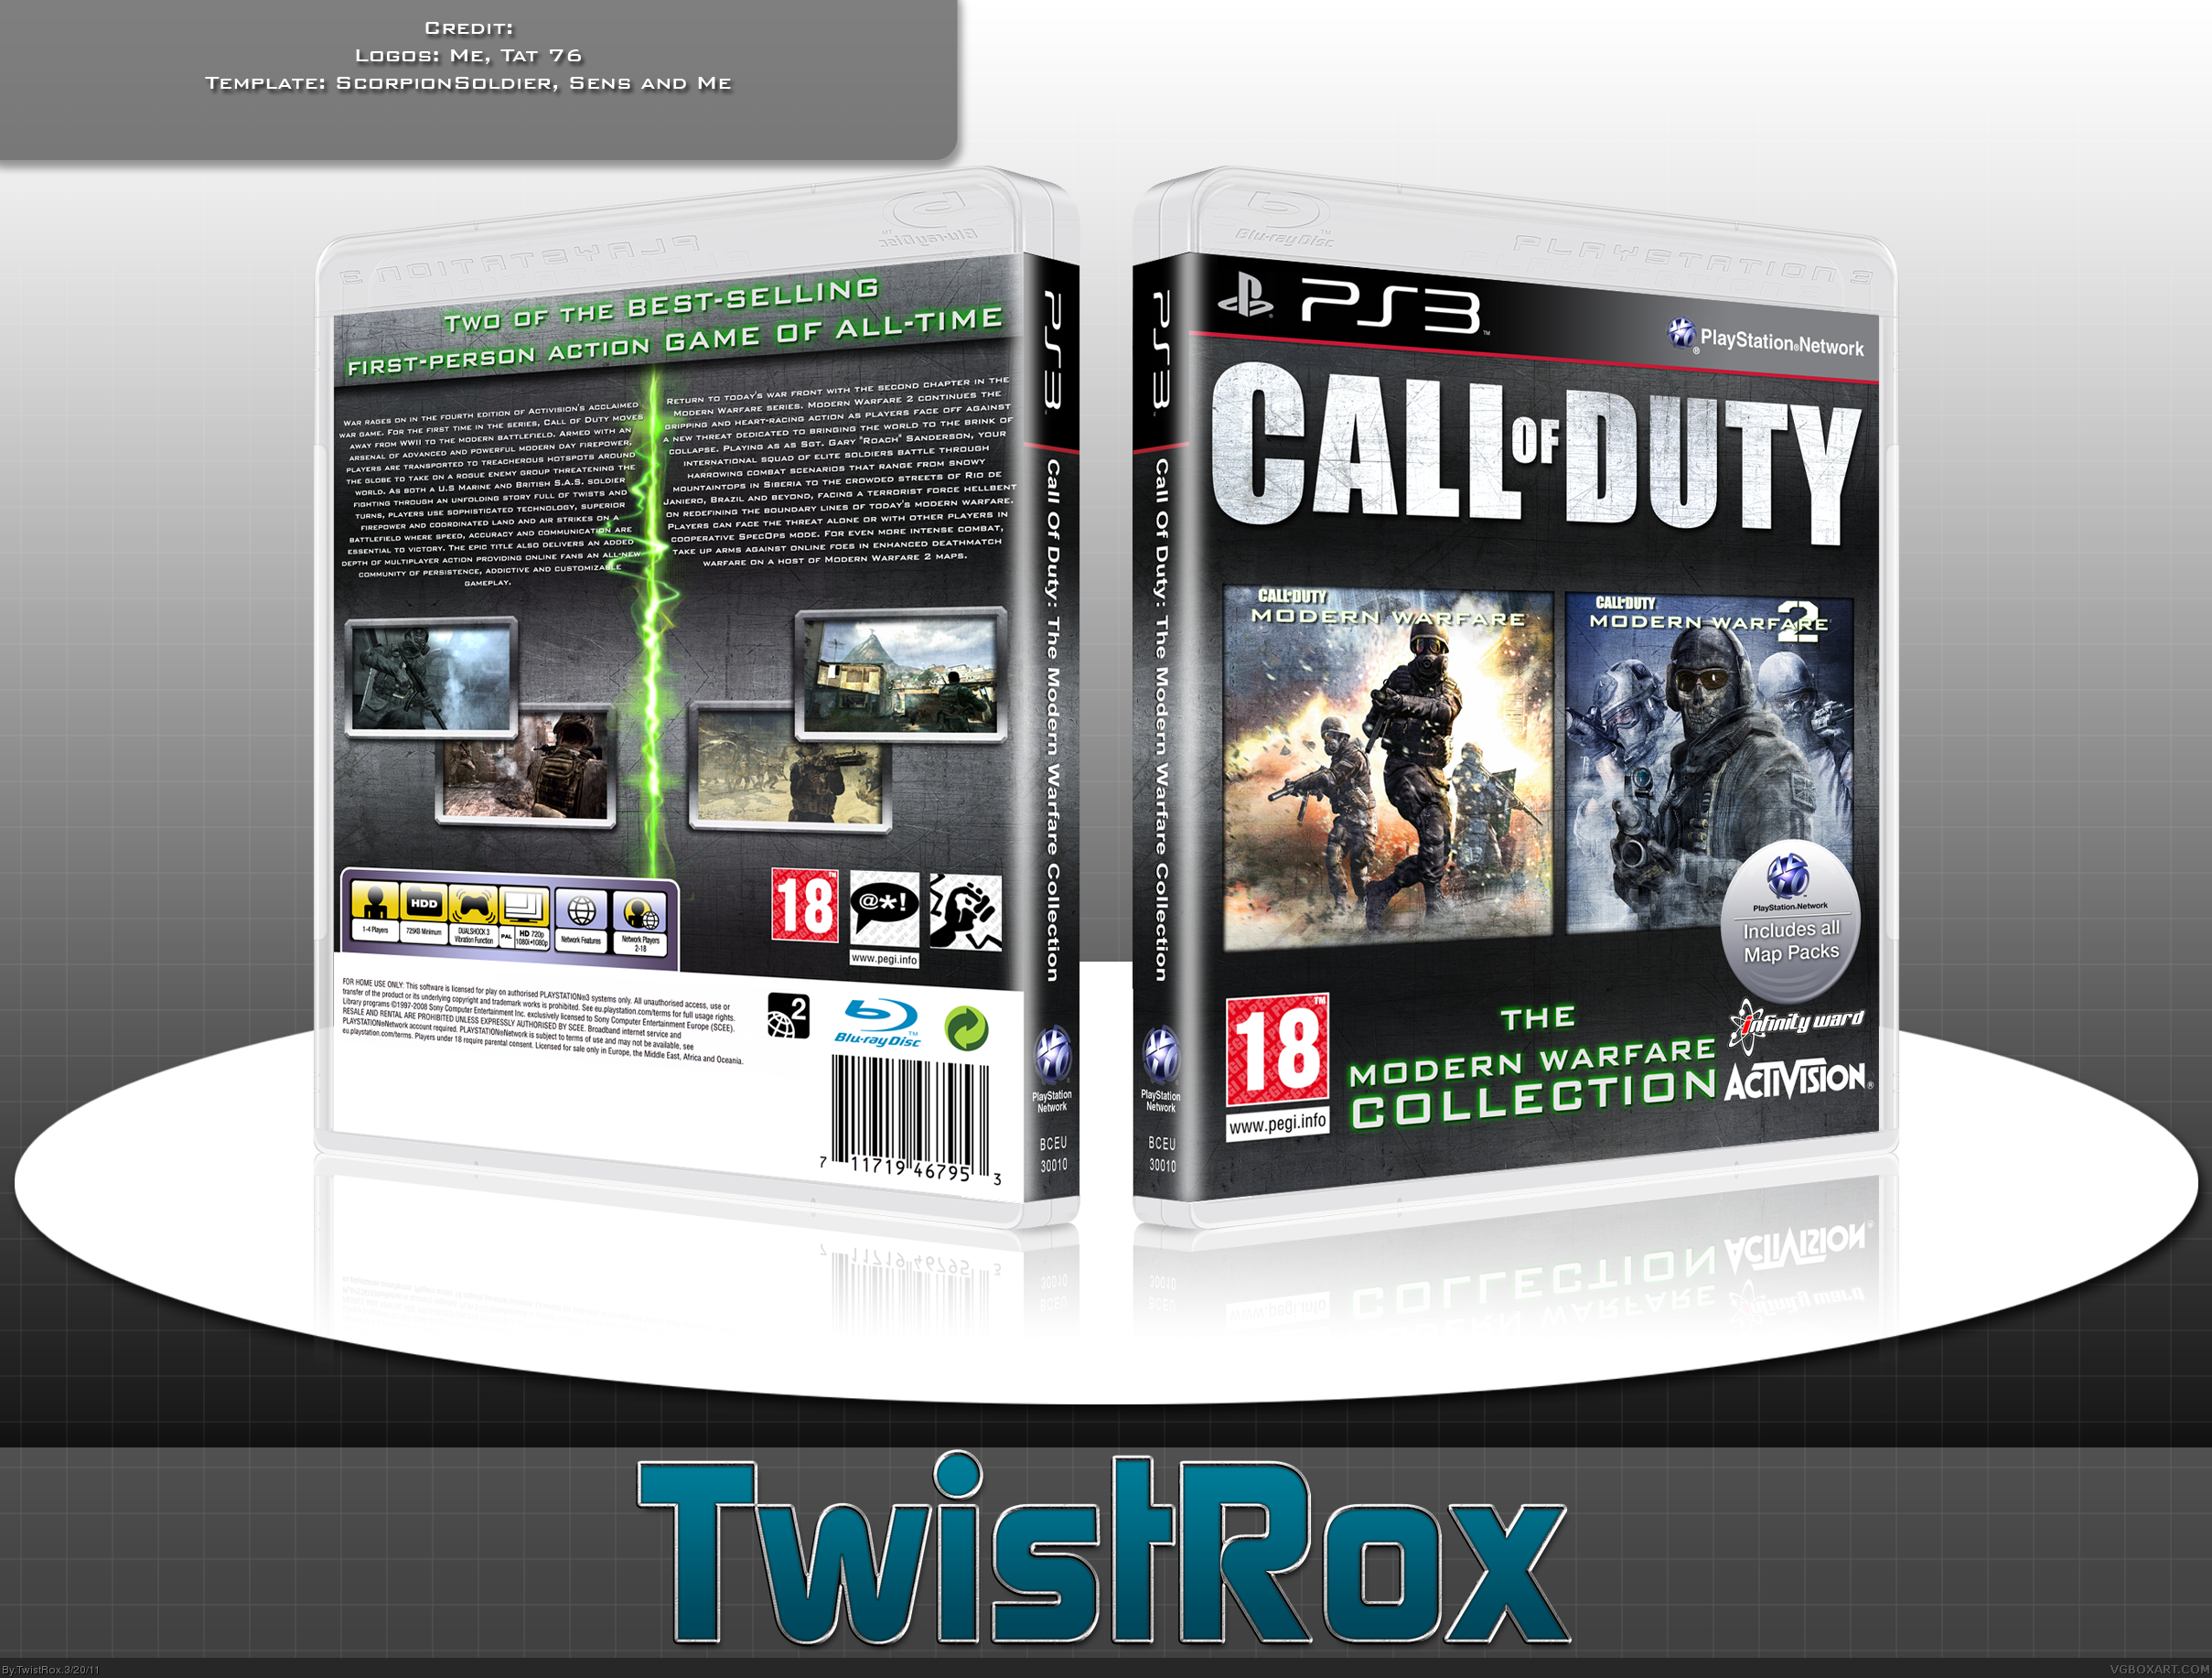 Call of Duty: The Modern Warfare Collection box cover